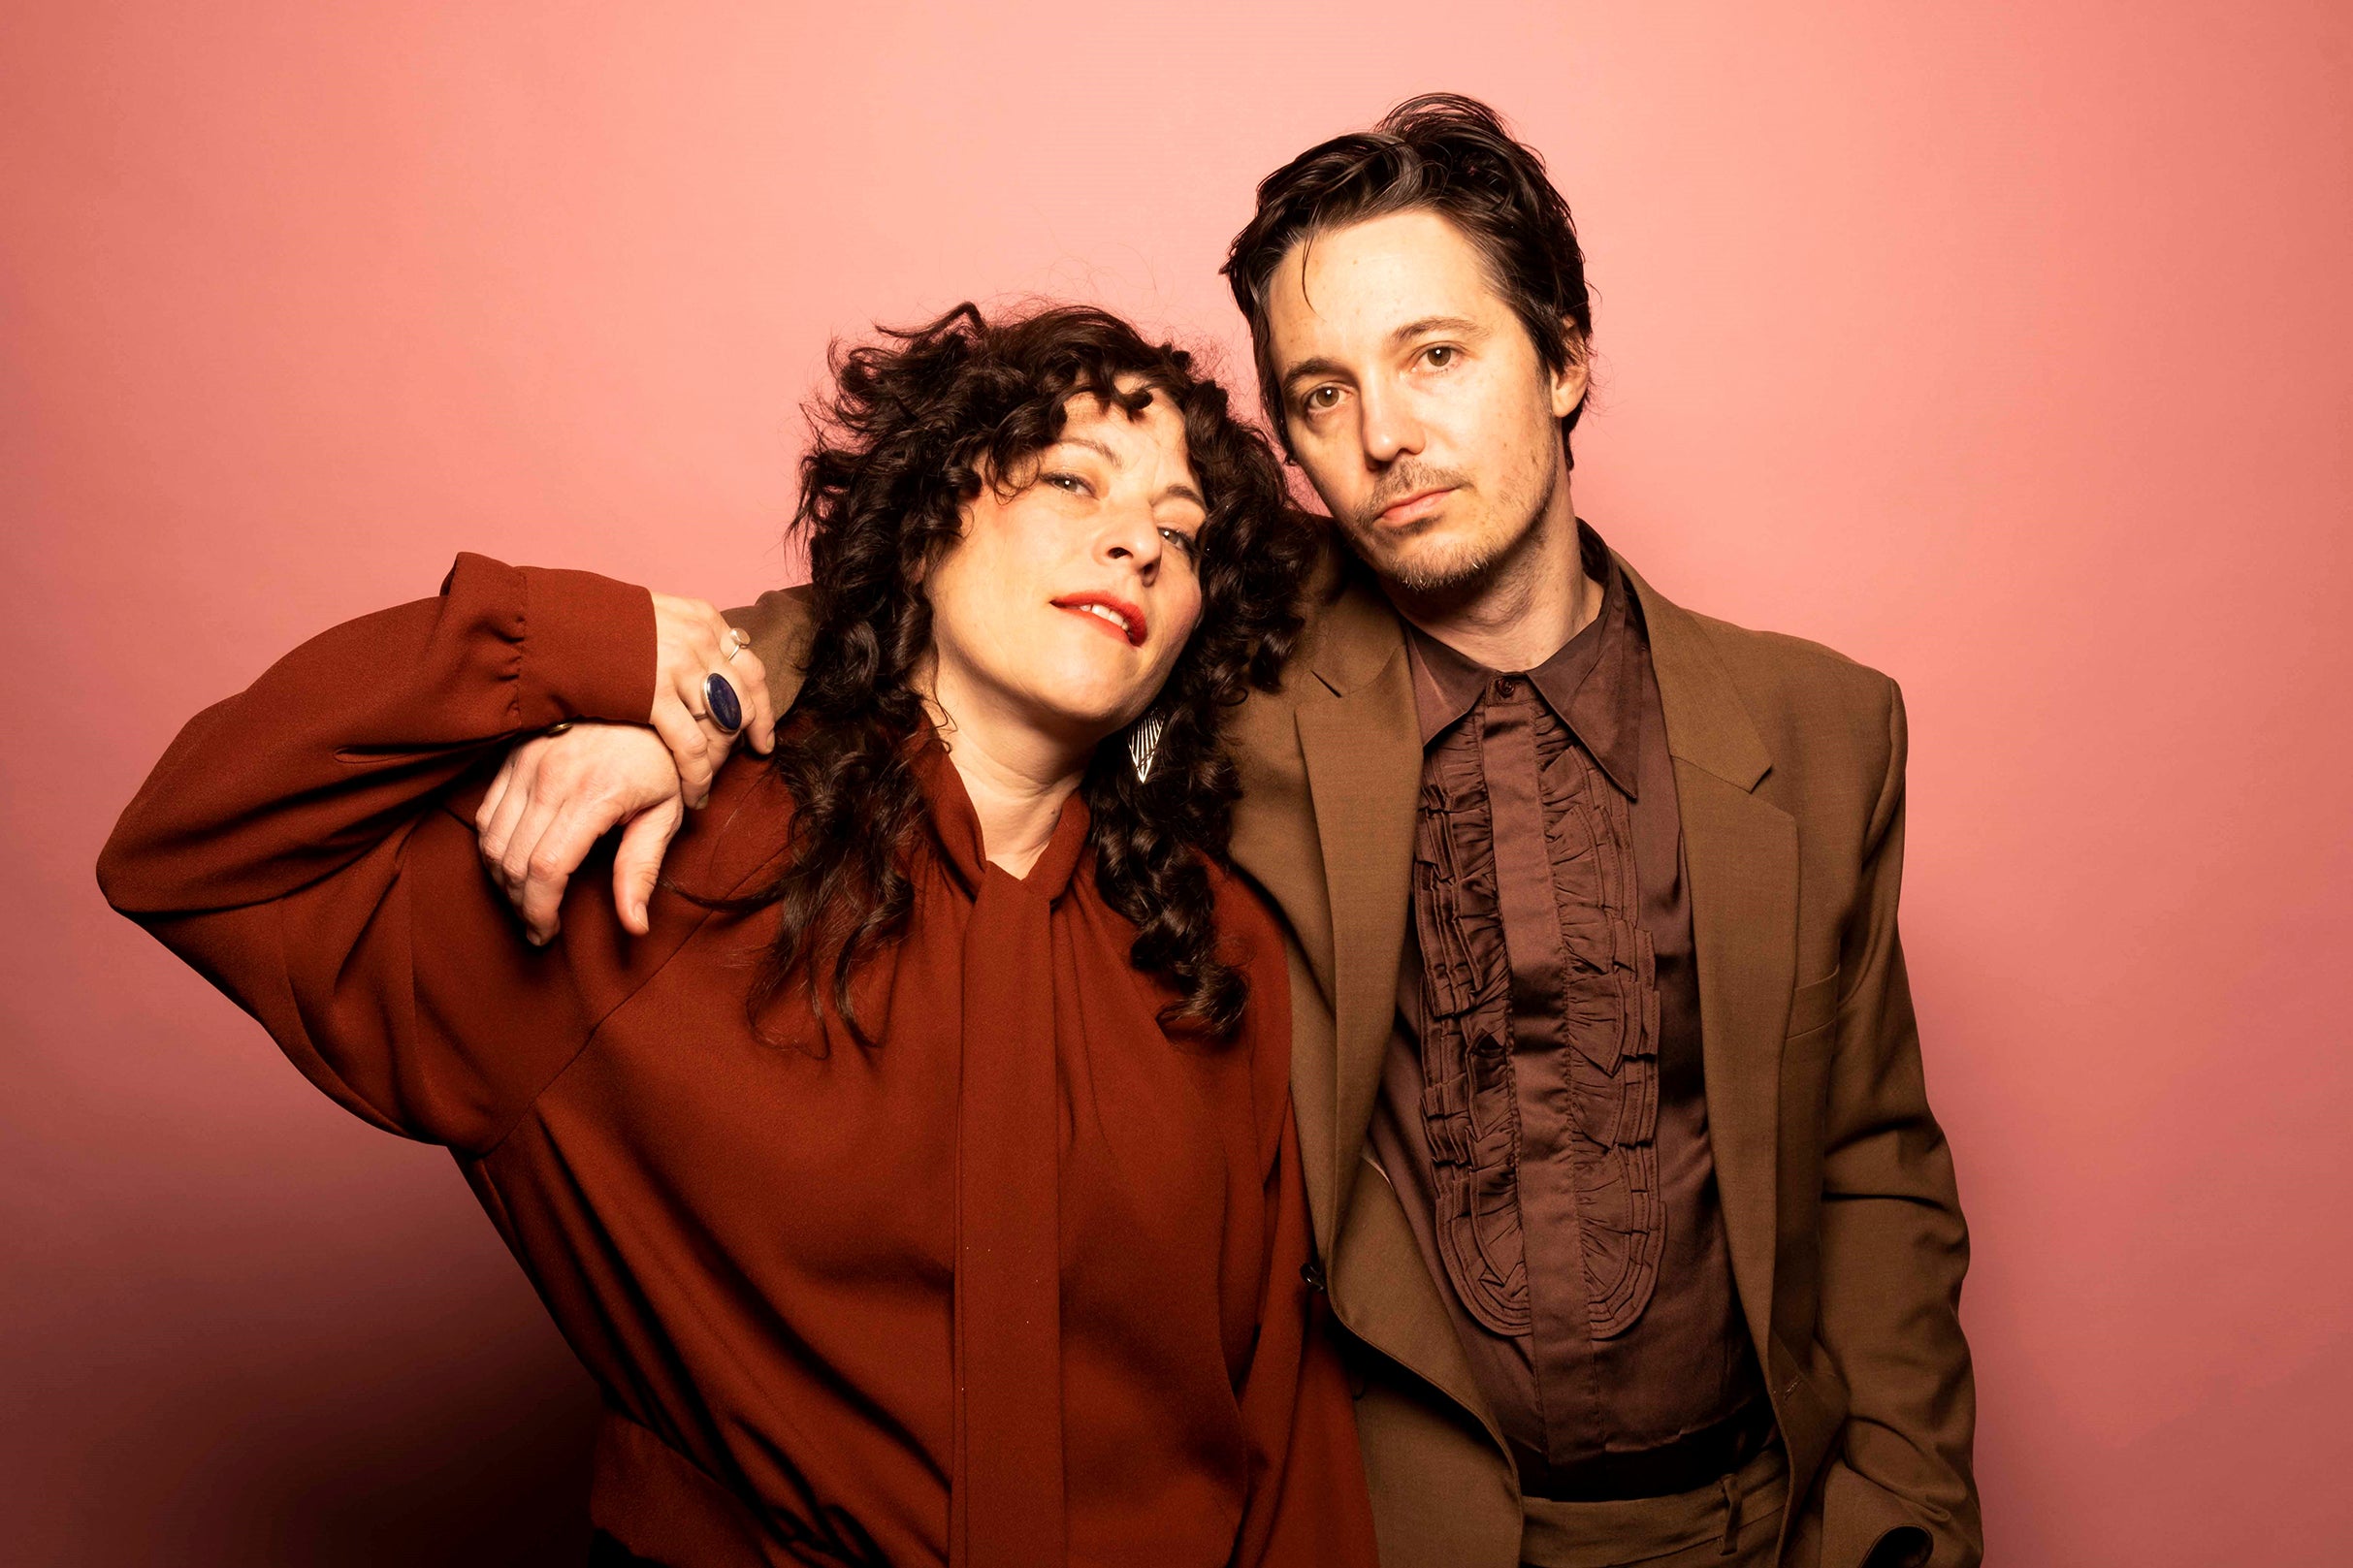 Shovels & Rope in Fort Collins promo photo for Exclusive presale offer code